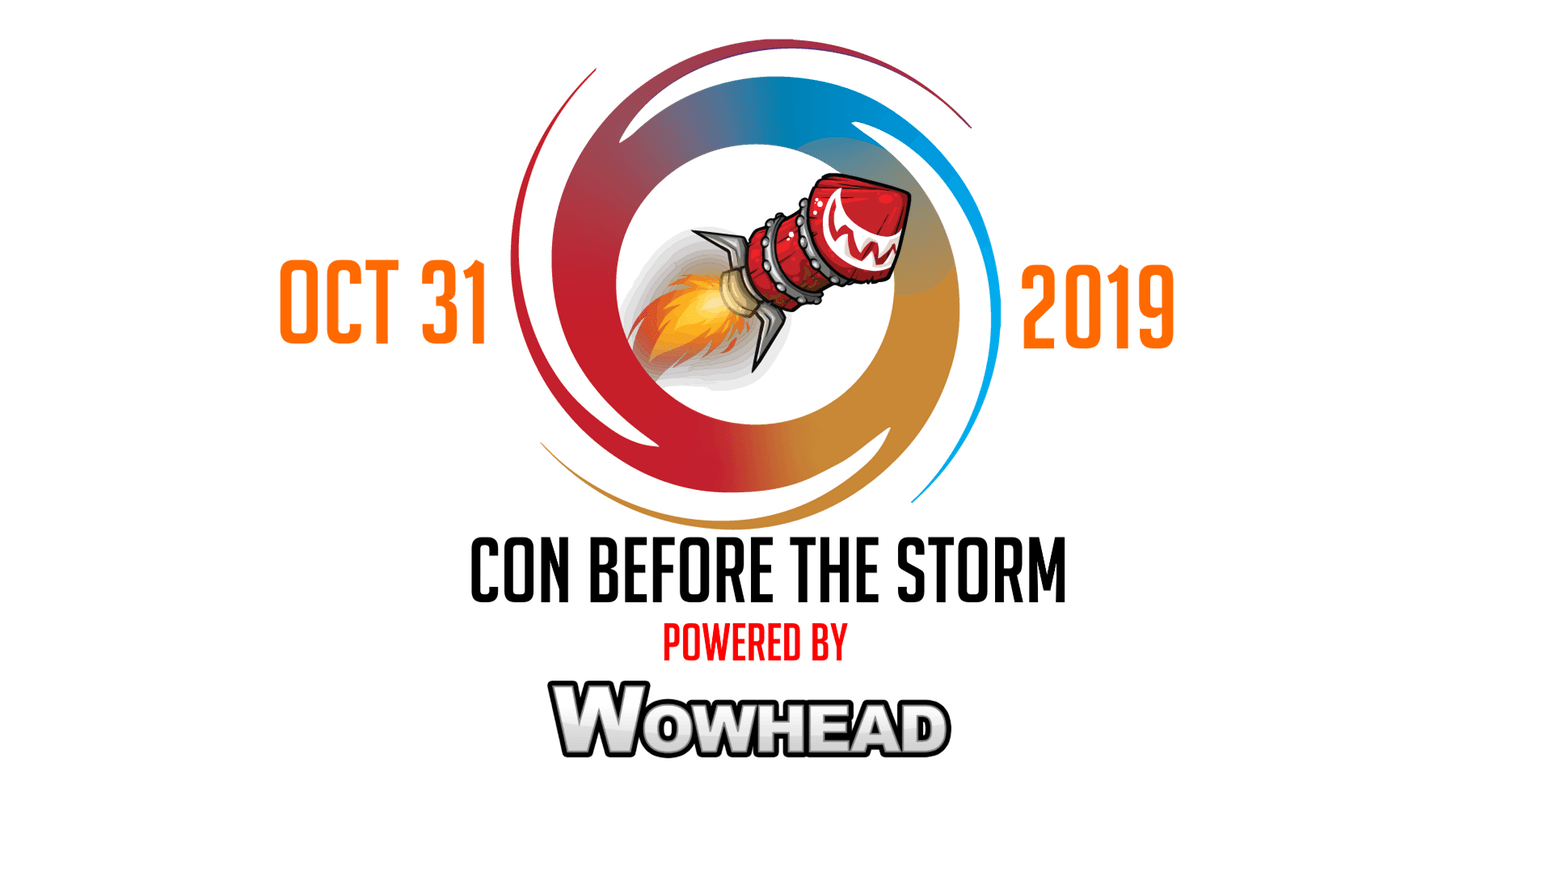 Wowhead.com Logo - Con Before the Storm 2019 Powered by Wowhead by d20crit.com ...